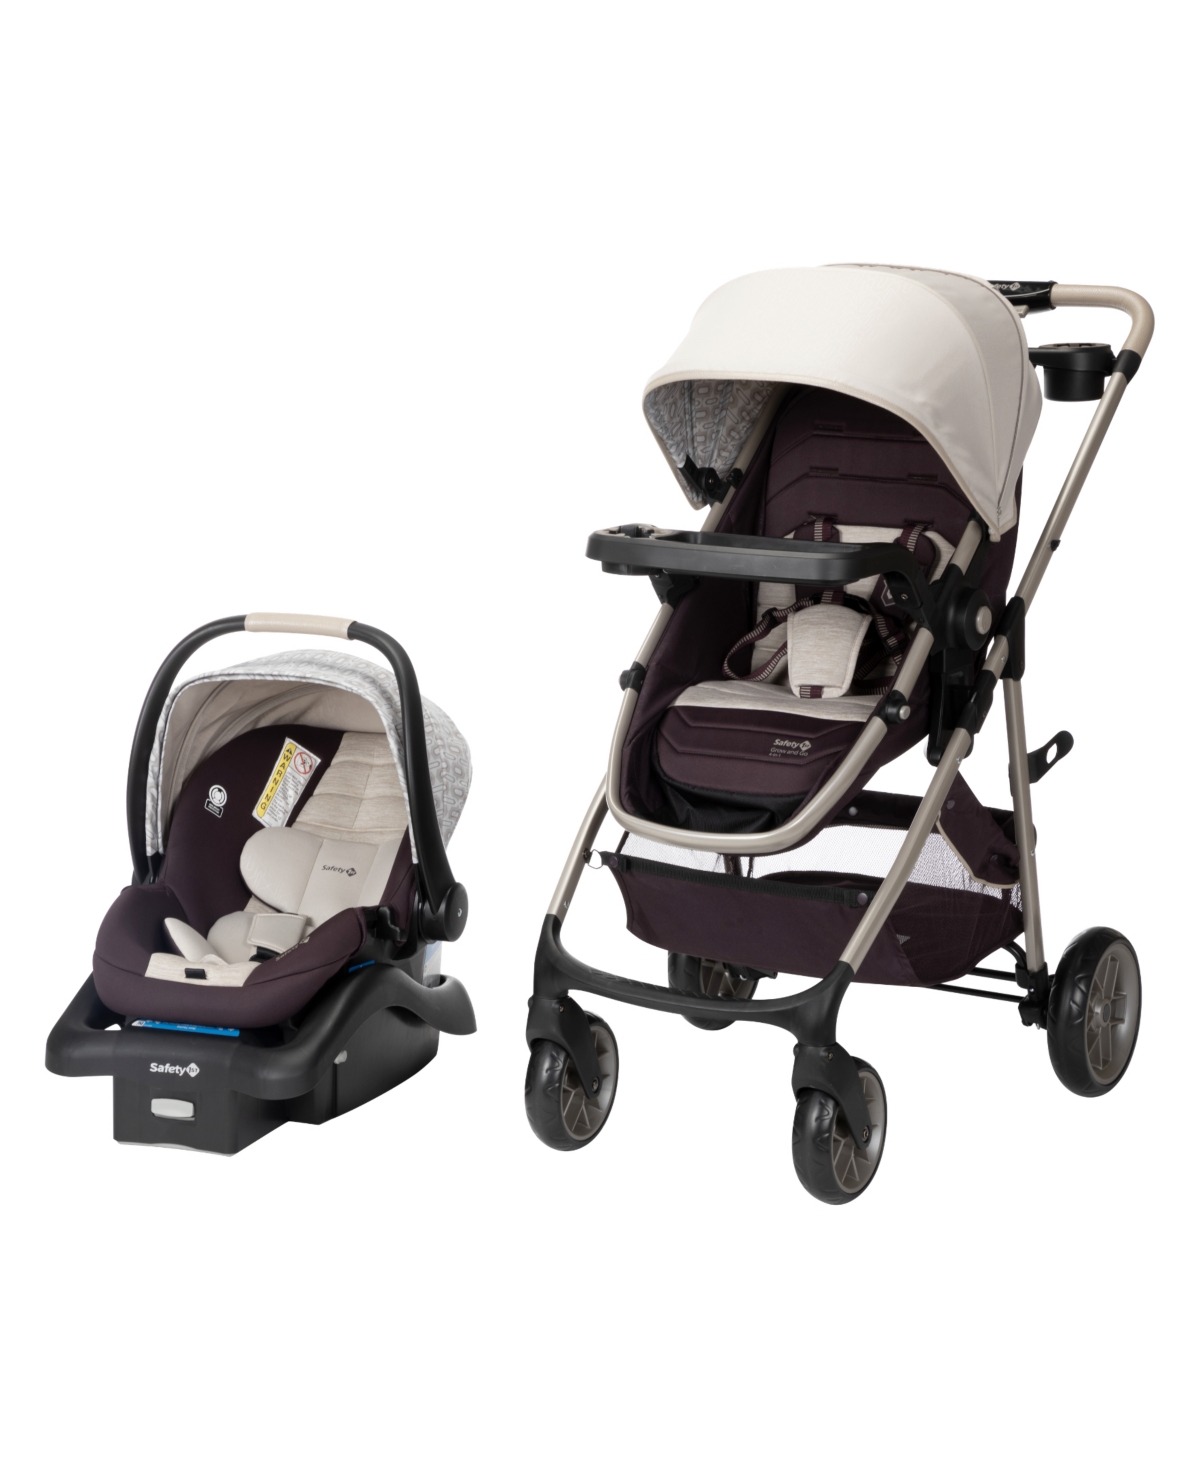 Safety 1st Baby Deluxe Grow and Go Flex 8-in-1 Travel System